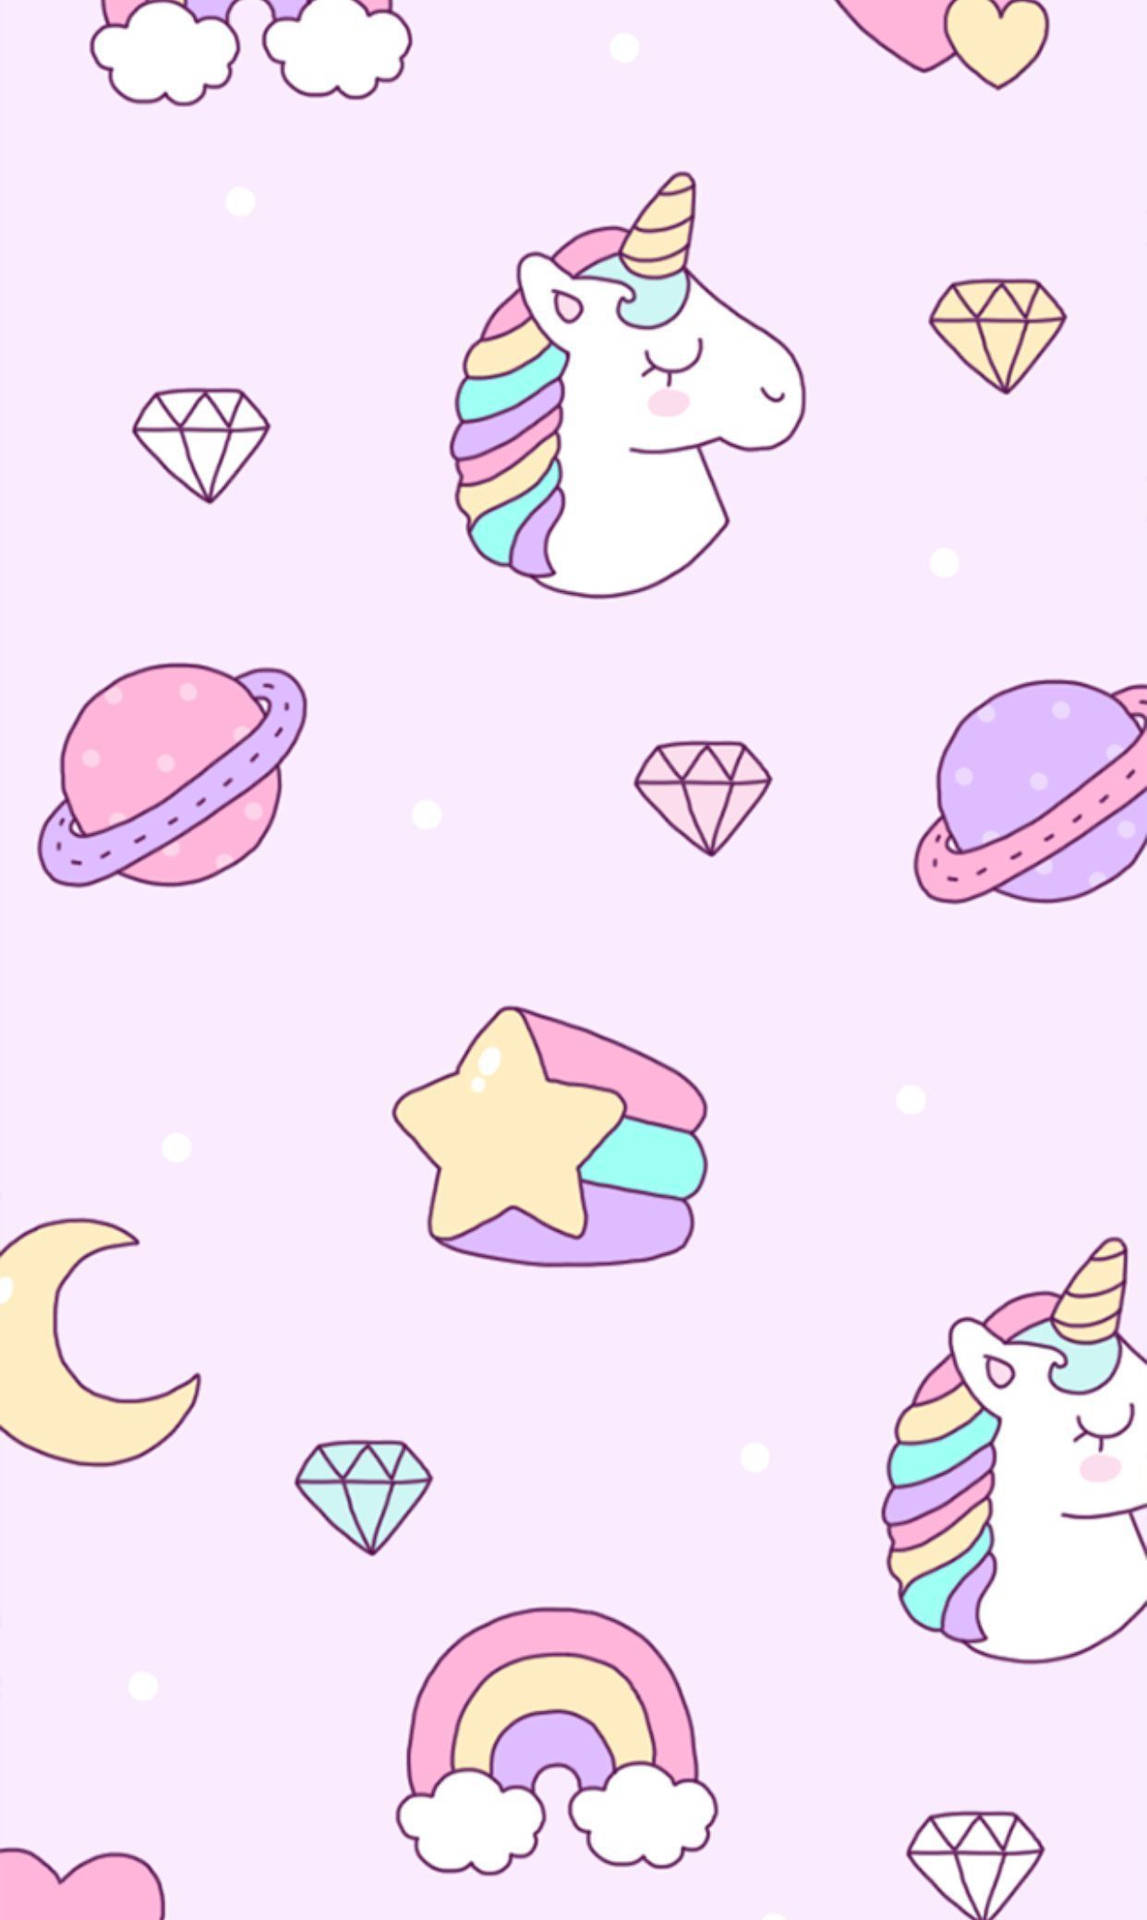 Download Childish But Cute Tablet Wallpaper | Wallpapers.com